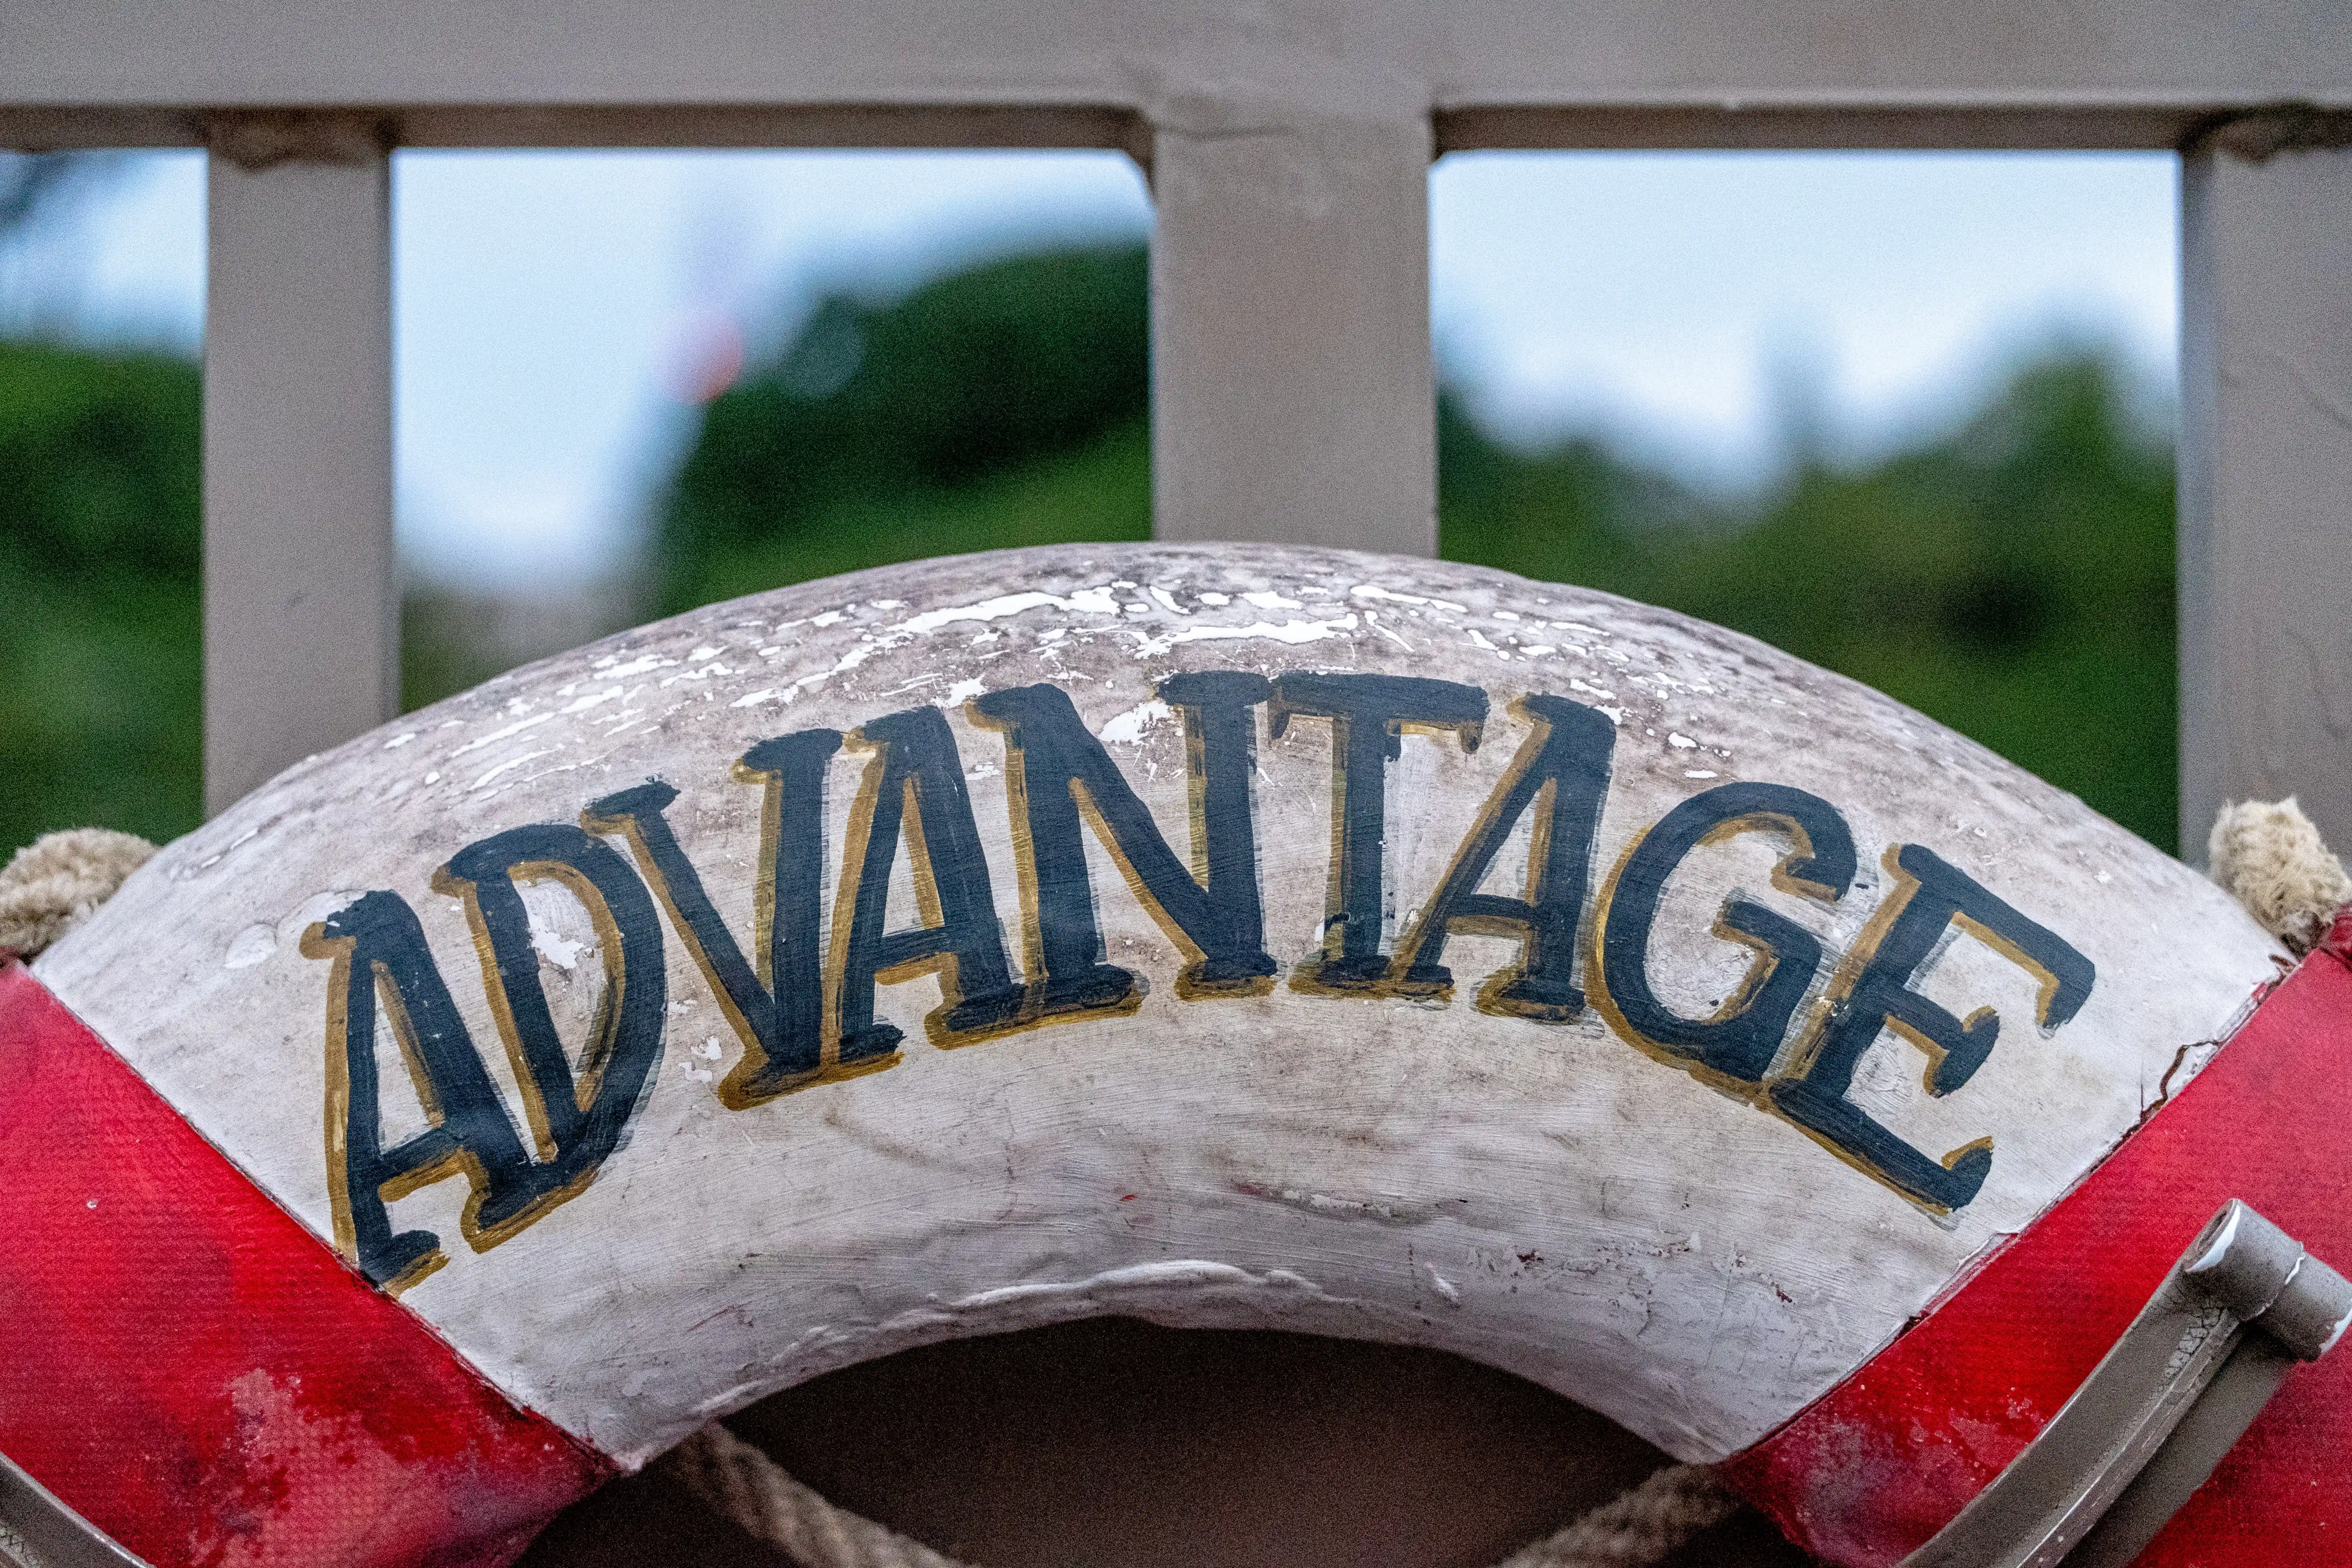 a sign showing the Advantage